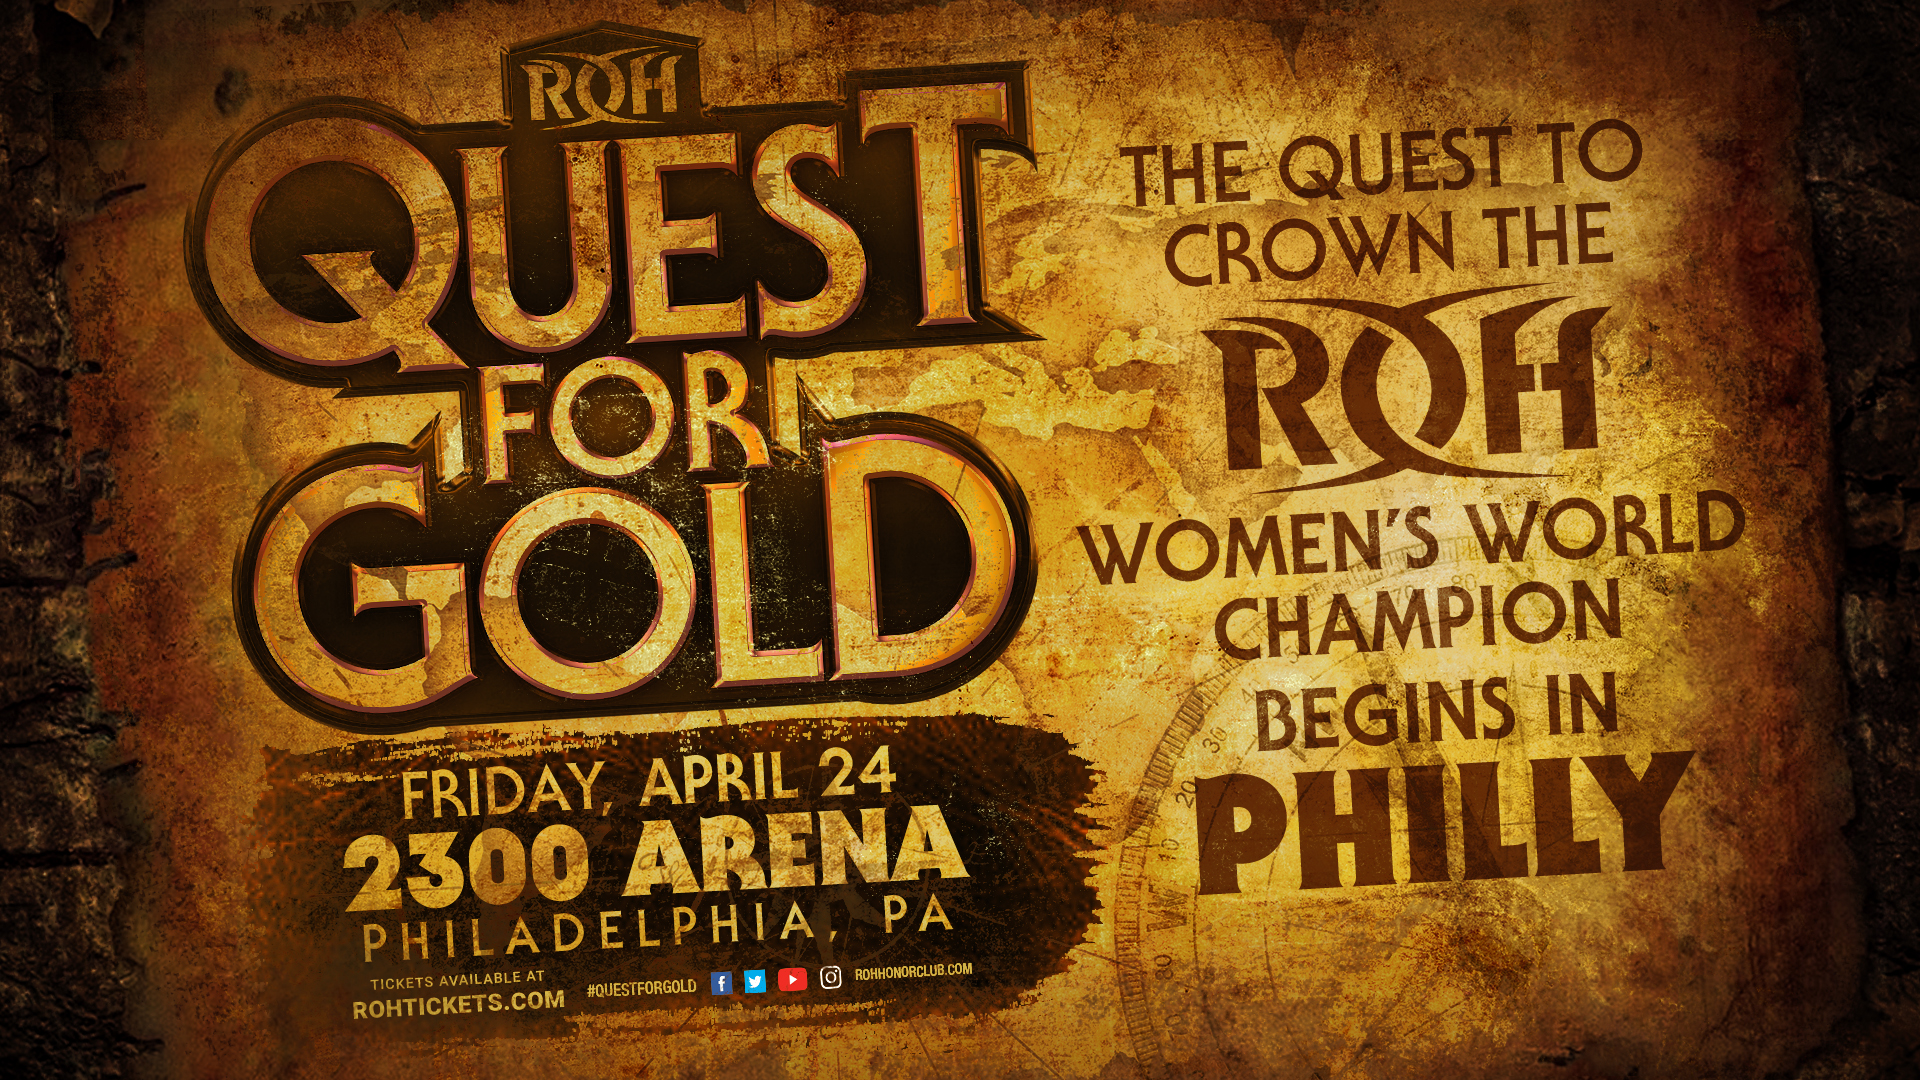 Tournament to Crown WOH Women’s World Champion Begins at Quest for Gold in Philadelphia